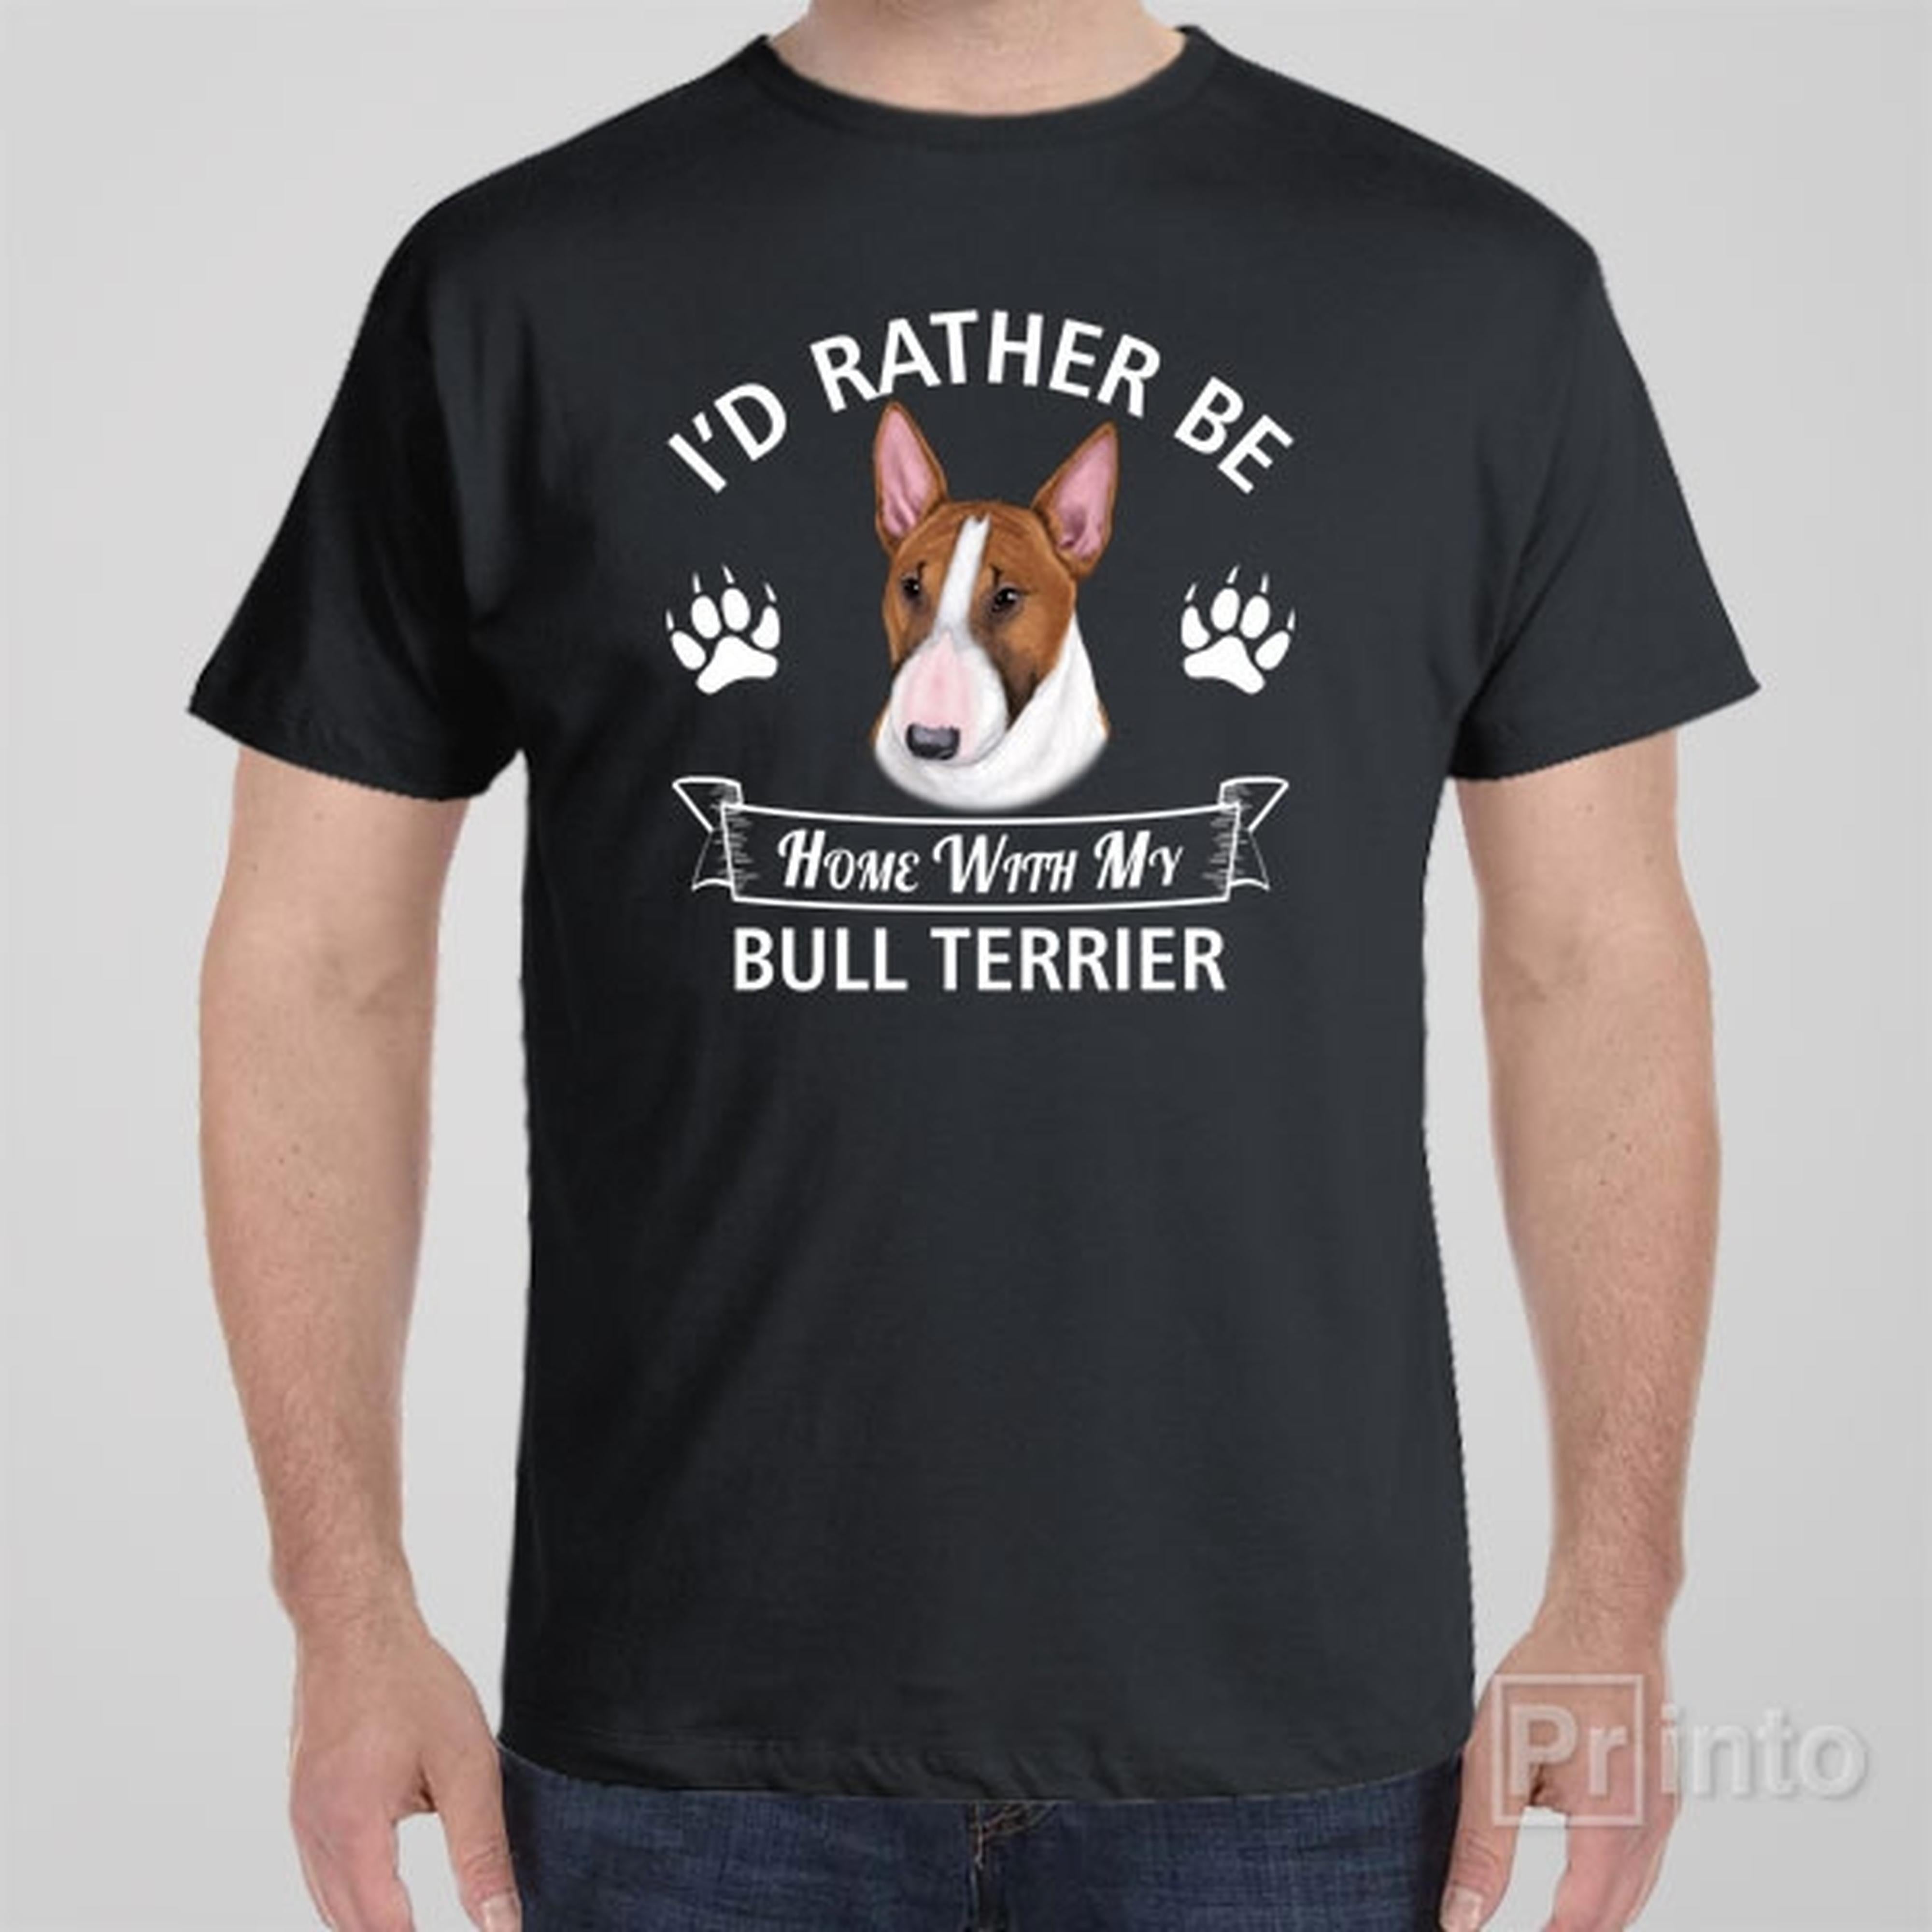 id-rather-stay-home-with-my-bull-terrier-t-shirt